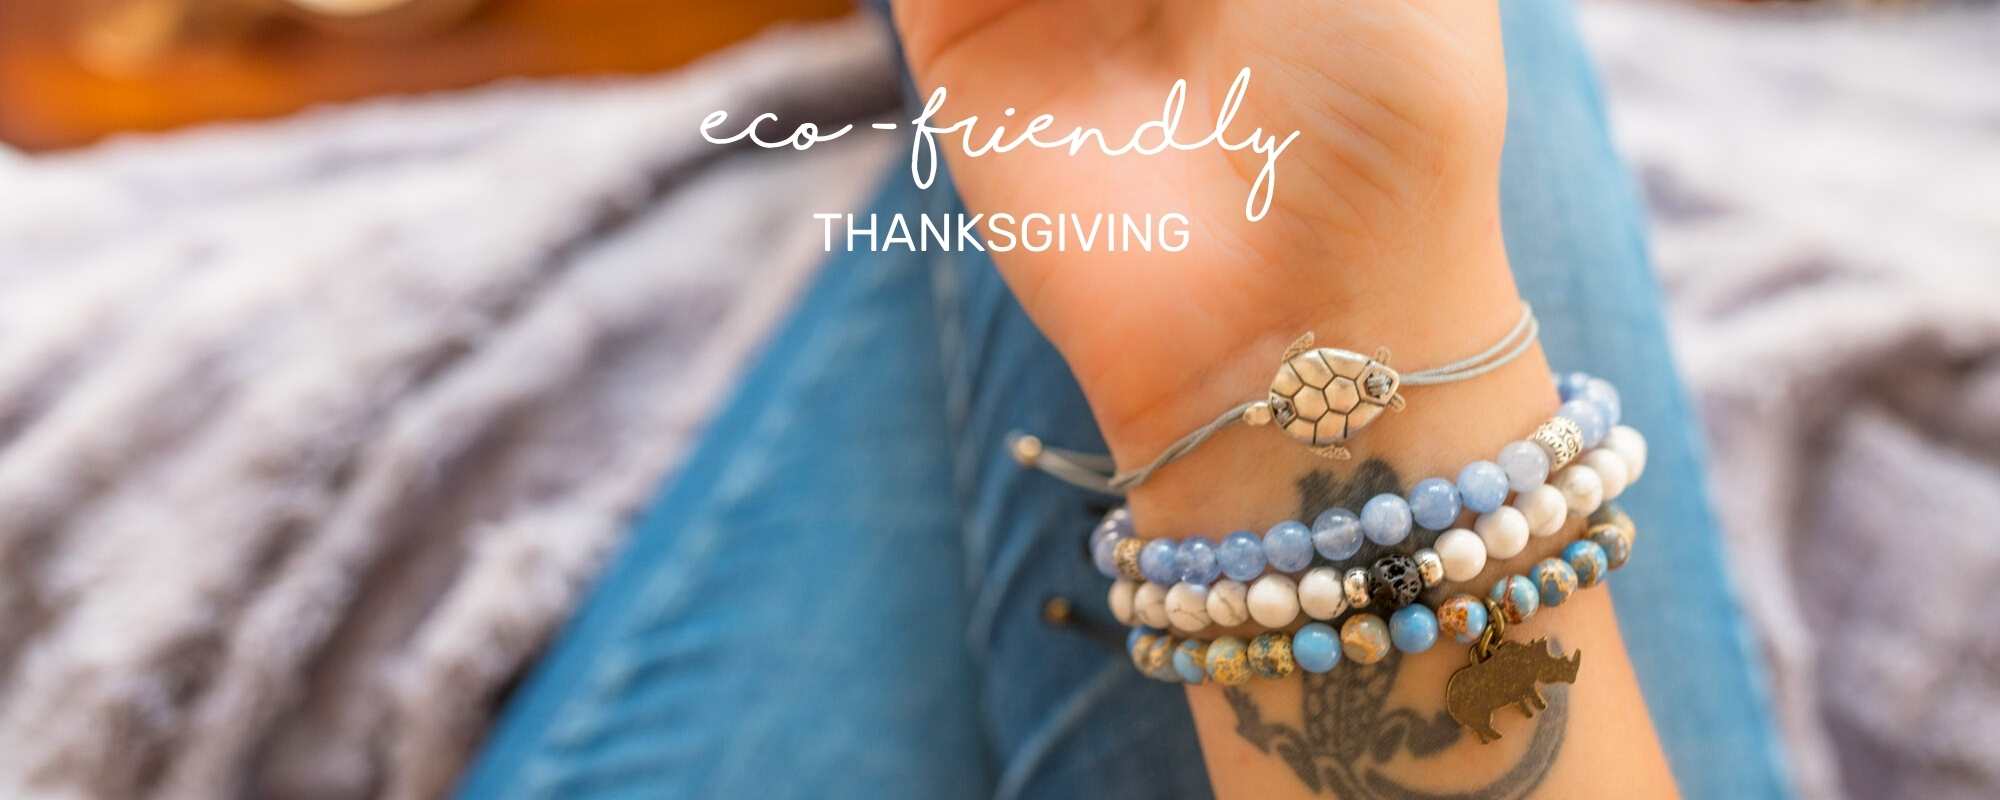 TIPS FOR AN ECO-FRIENDLY THANKSGIVING